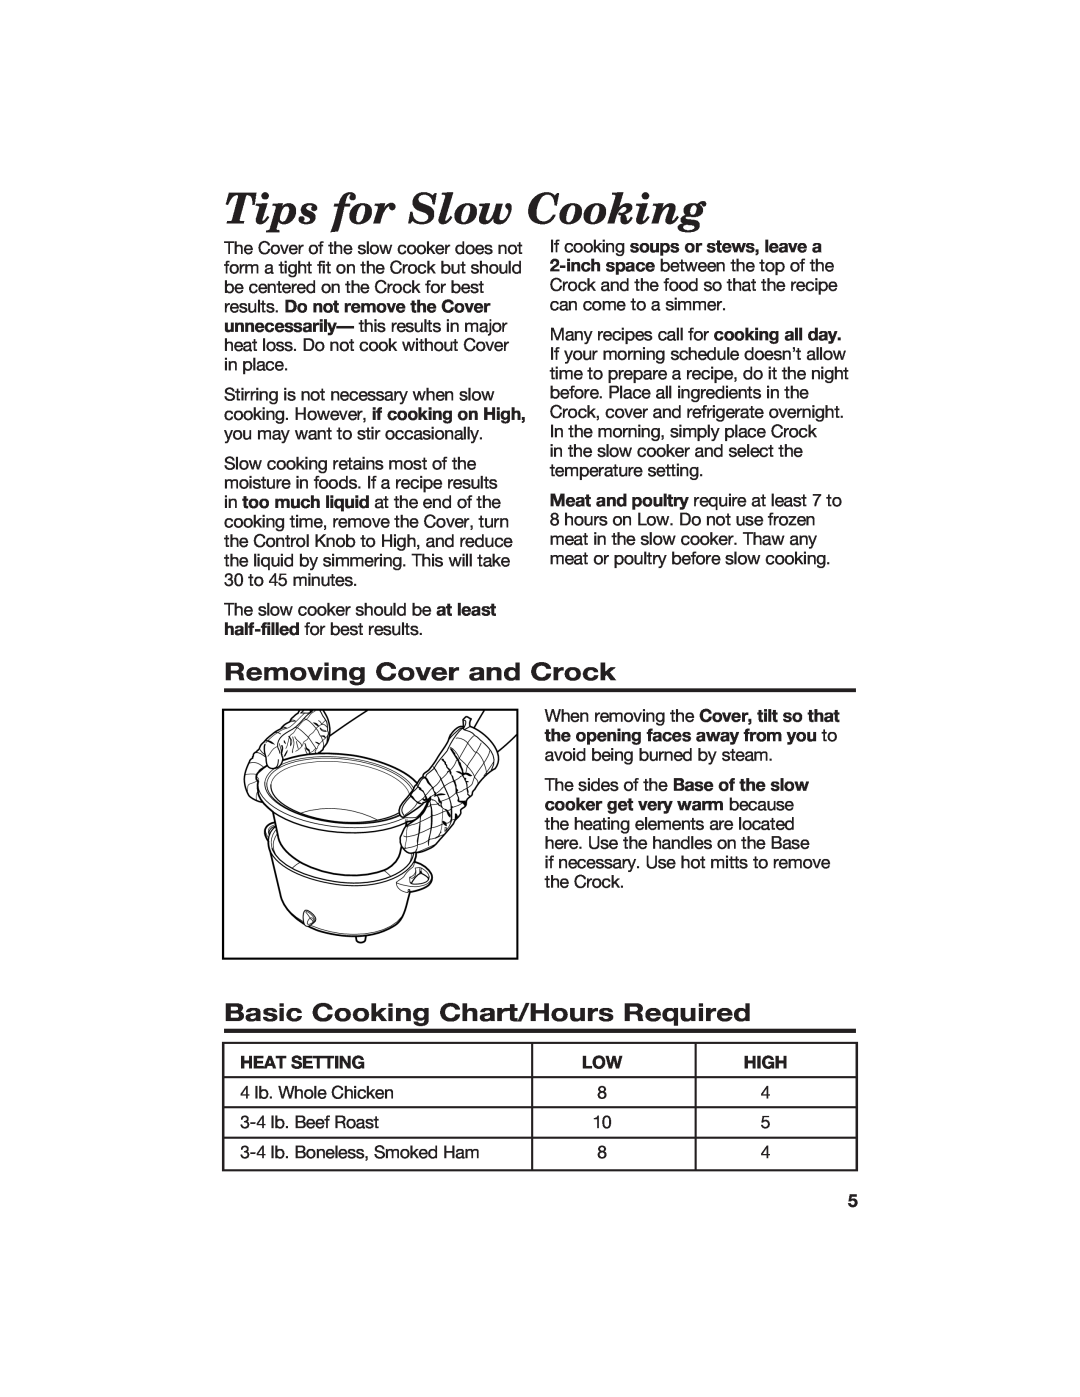 Hamilton Beach 840084500 Tips for Slow Cooking, Removing Cover and Crock, Basic Cooking Chart/Hours Required, Heat Setting 